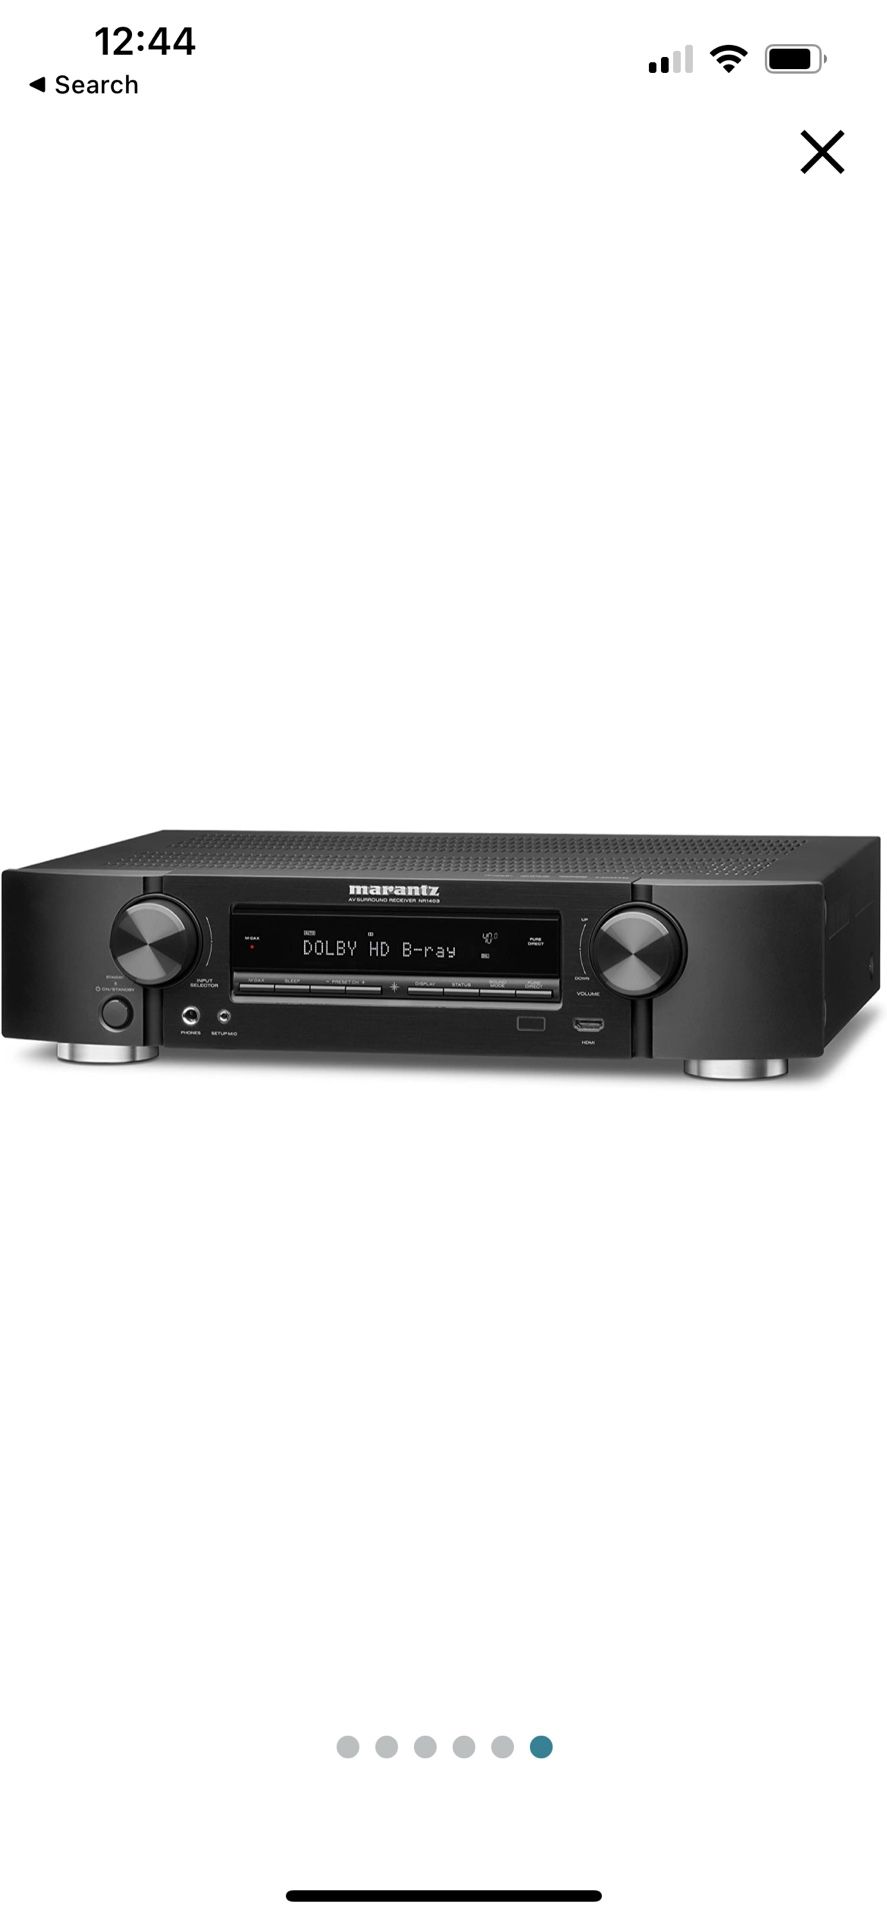 Marantz NR1403 5.1-channel home theater receiver